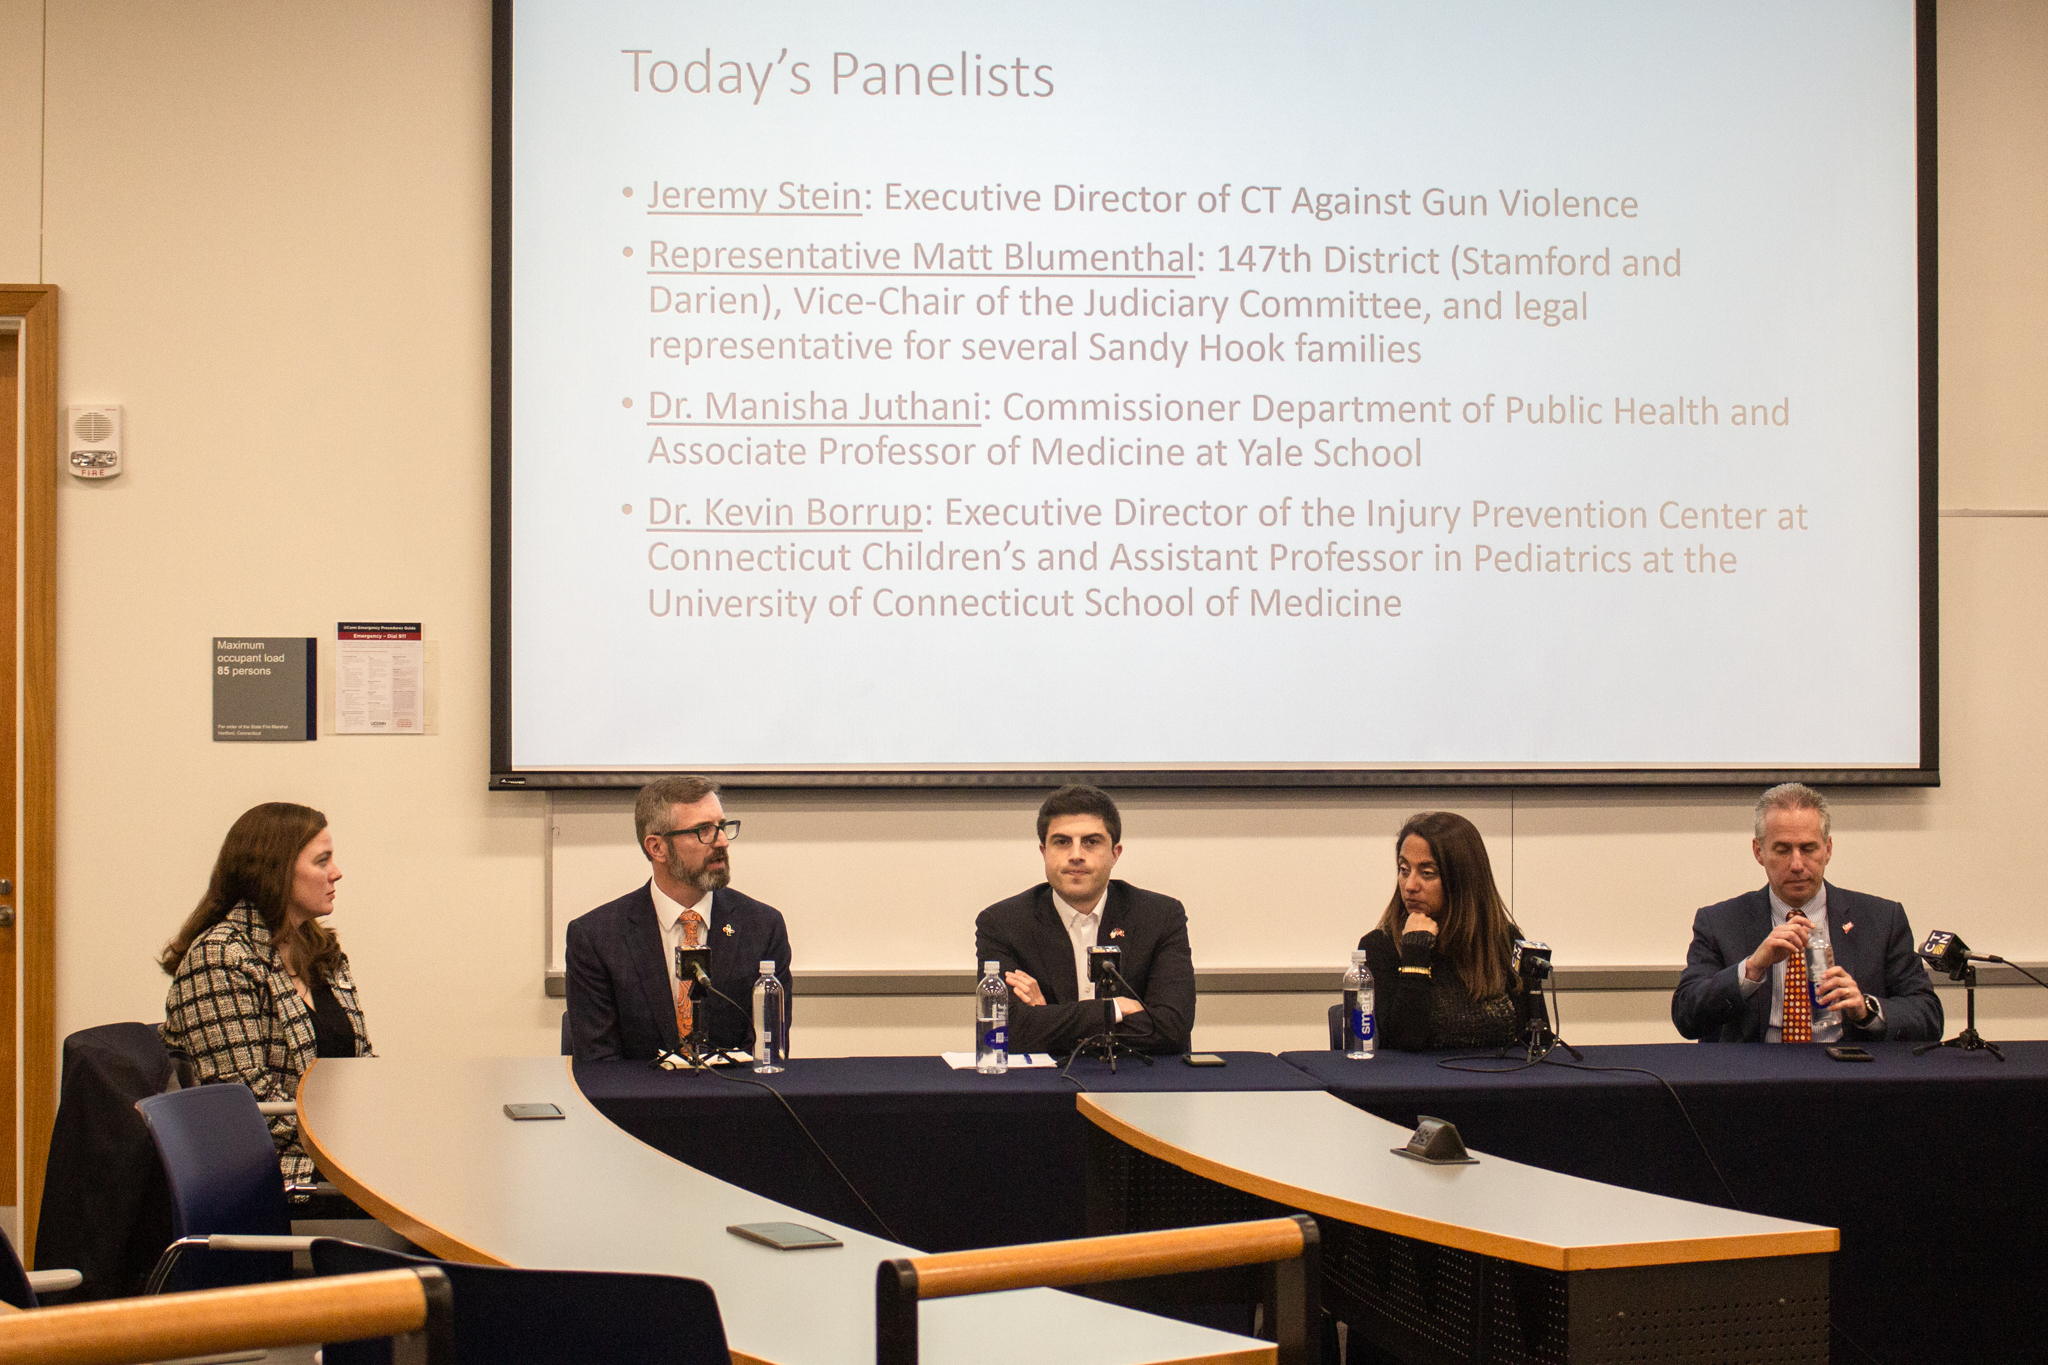 Photo of ARMS Center Director Kerri Raissian, PhD, Kevin Borrup, PhD, State Rep. Matt Blumenthal, DPH Commissioner Manisha Juthani, PhD, and Jeremy Stein during the panel discussion, "How Sandy Hook Changed the Legal Environment"